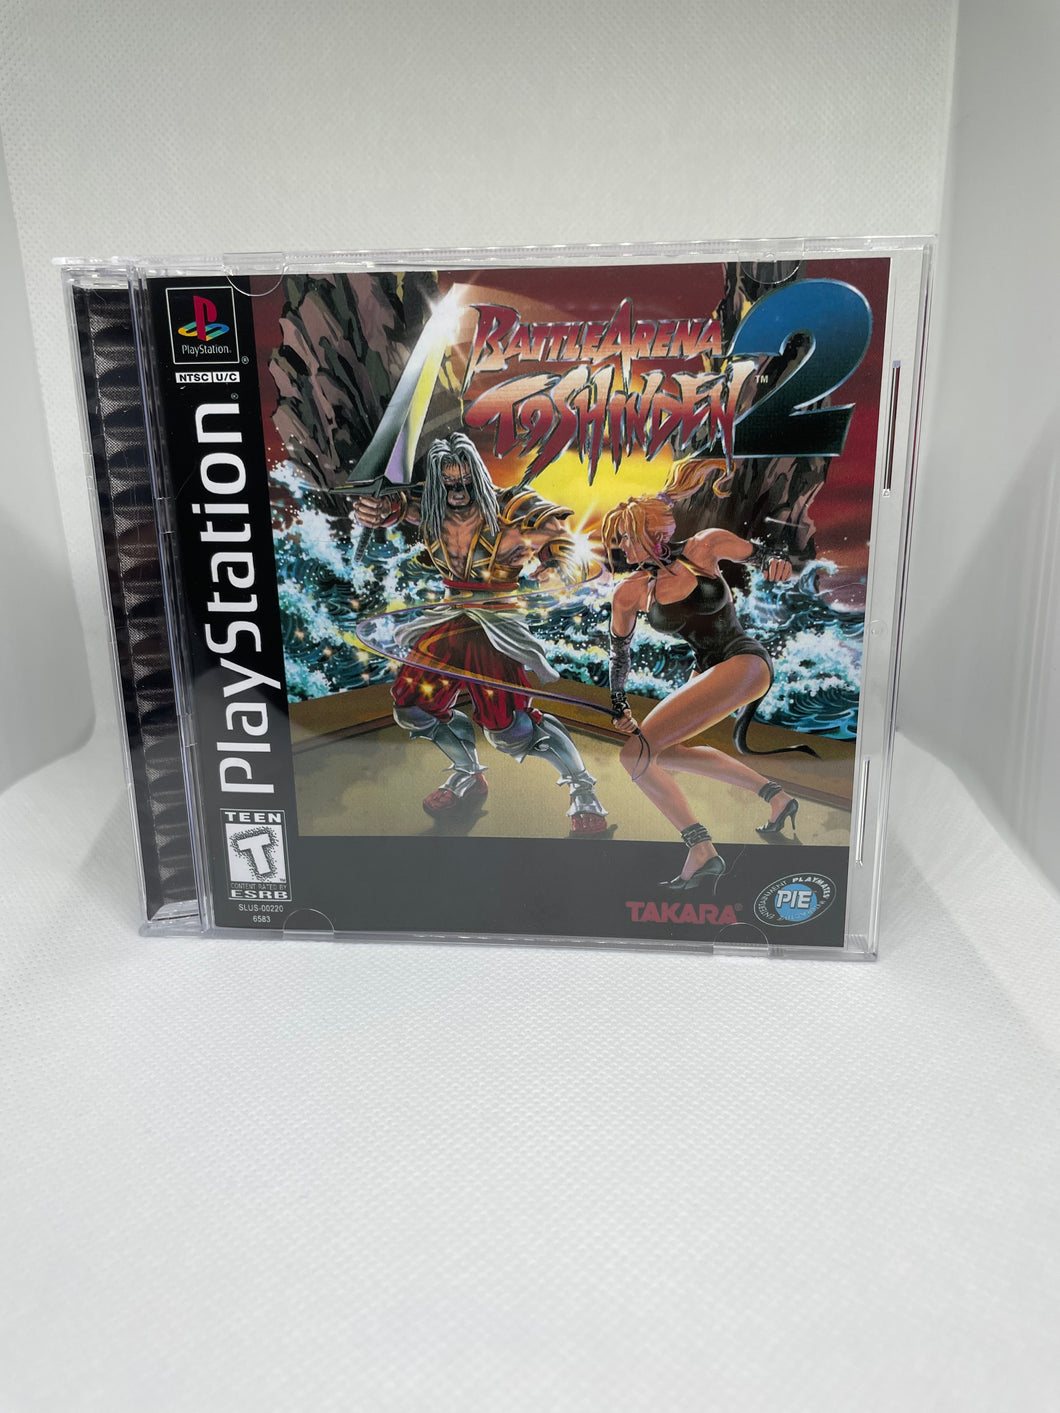 Battle Arena Toshinden 2 PS1 Reproduction Case